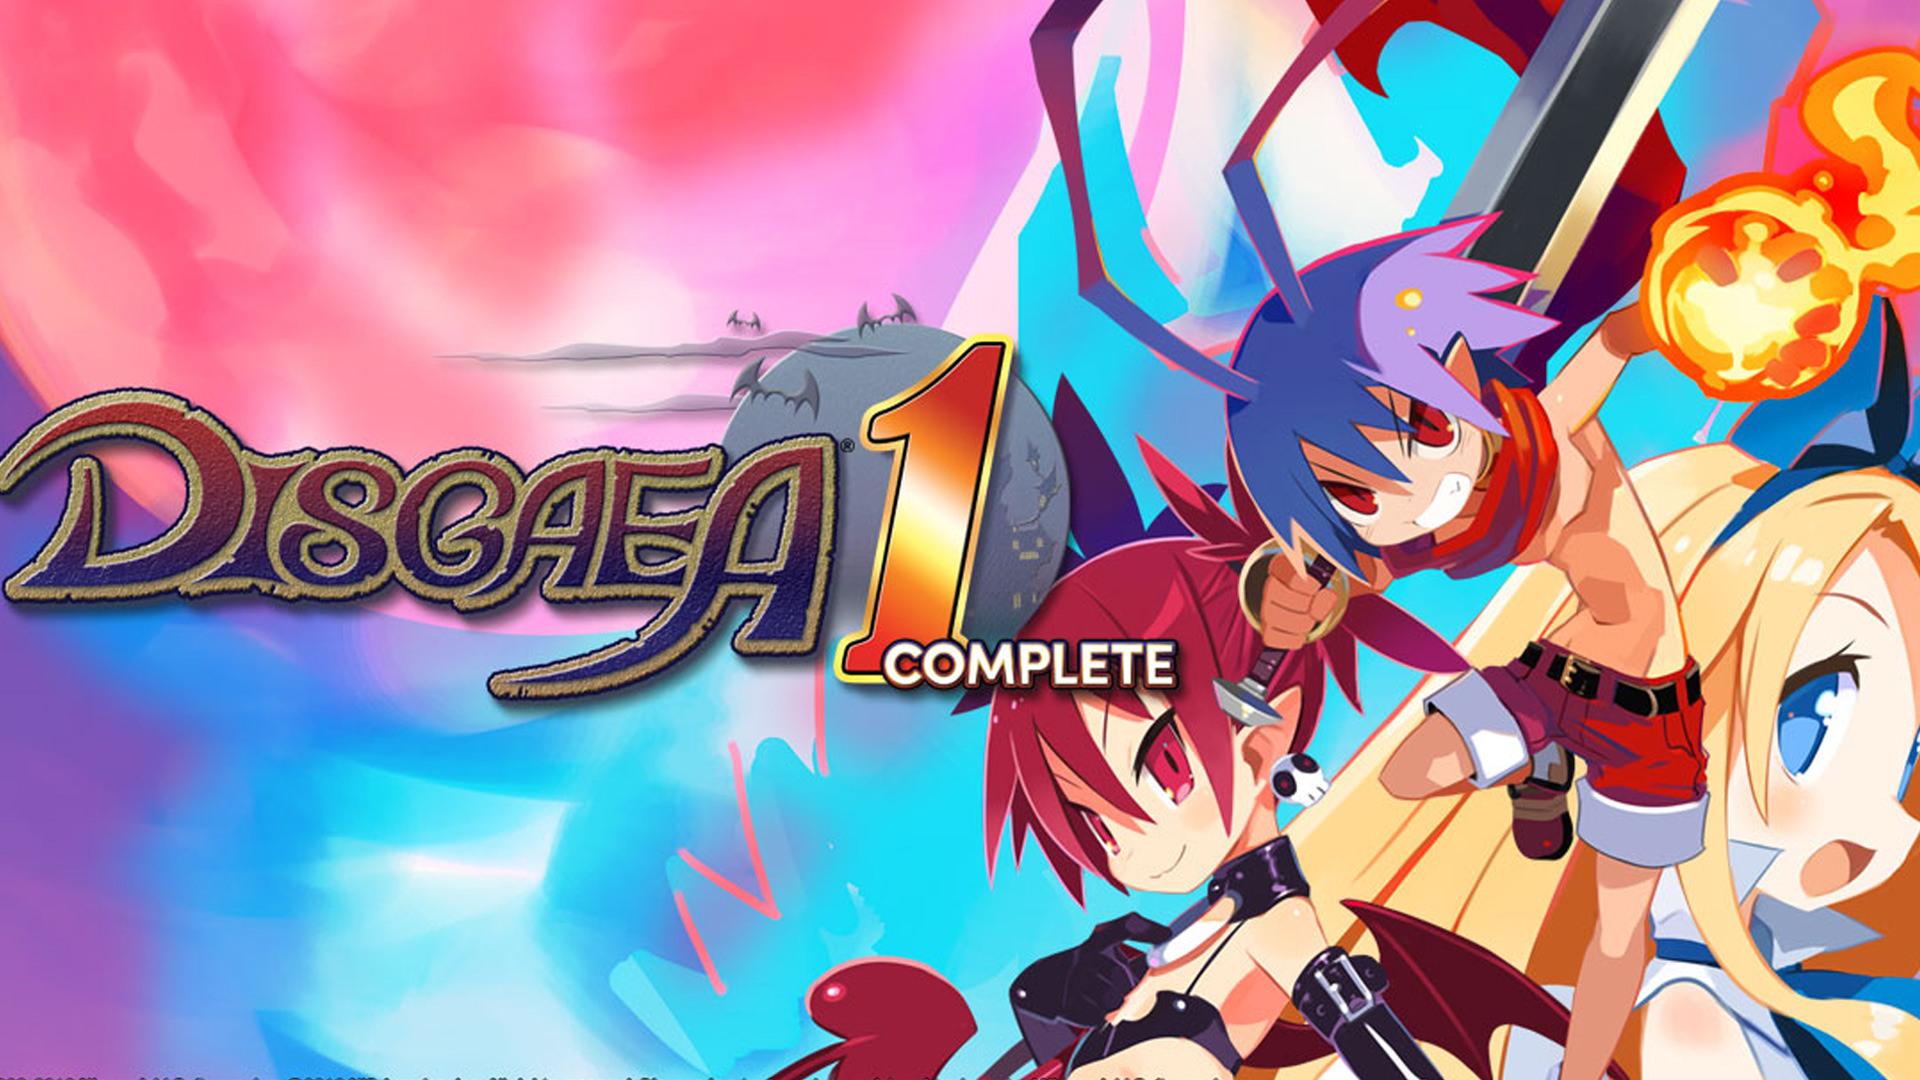 Disgaea 1 Complete review